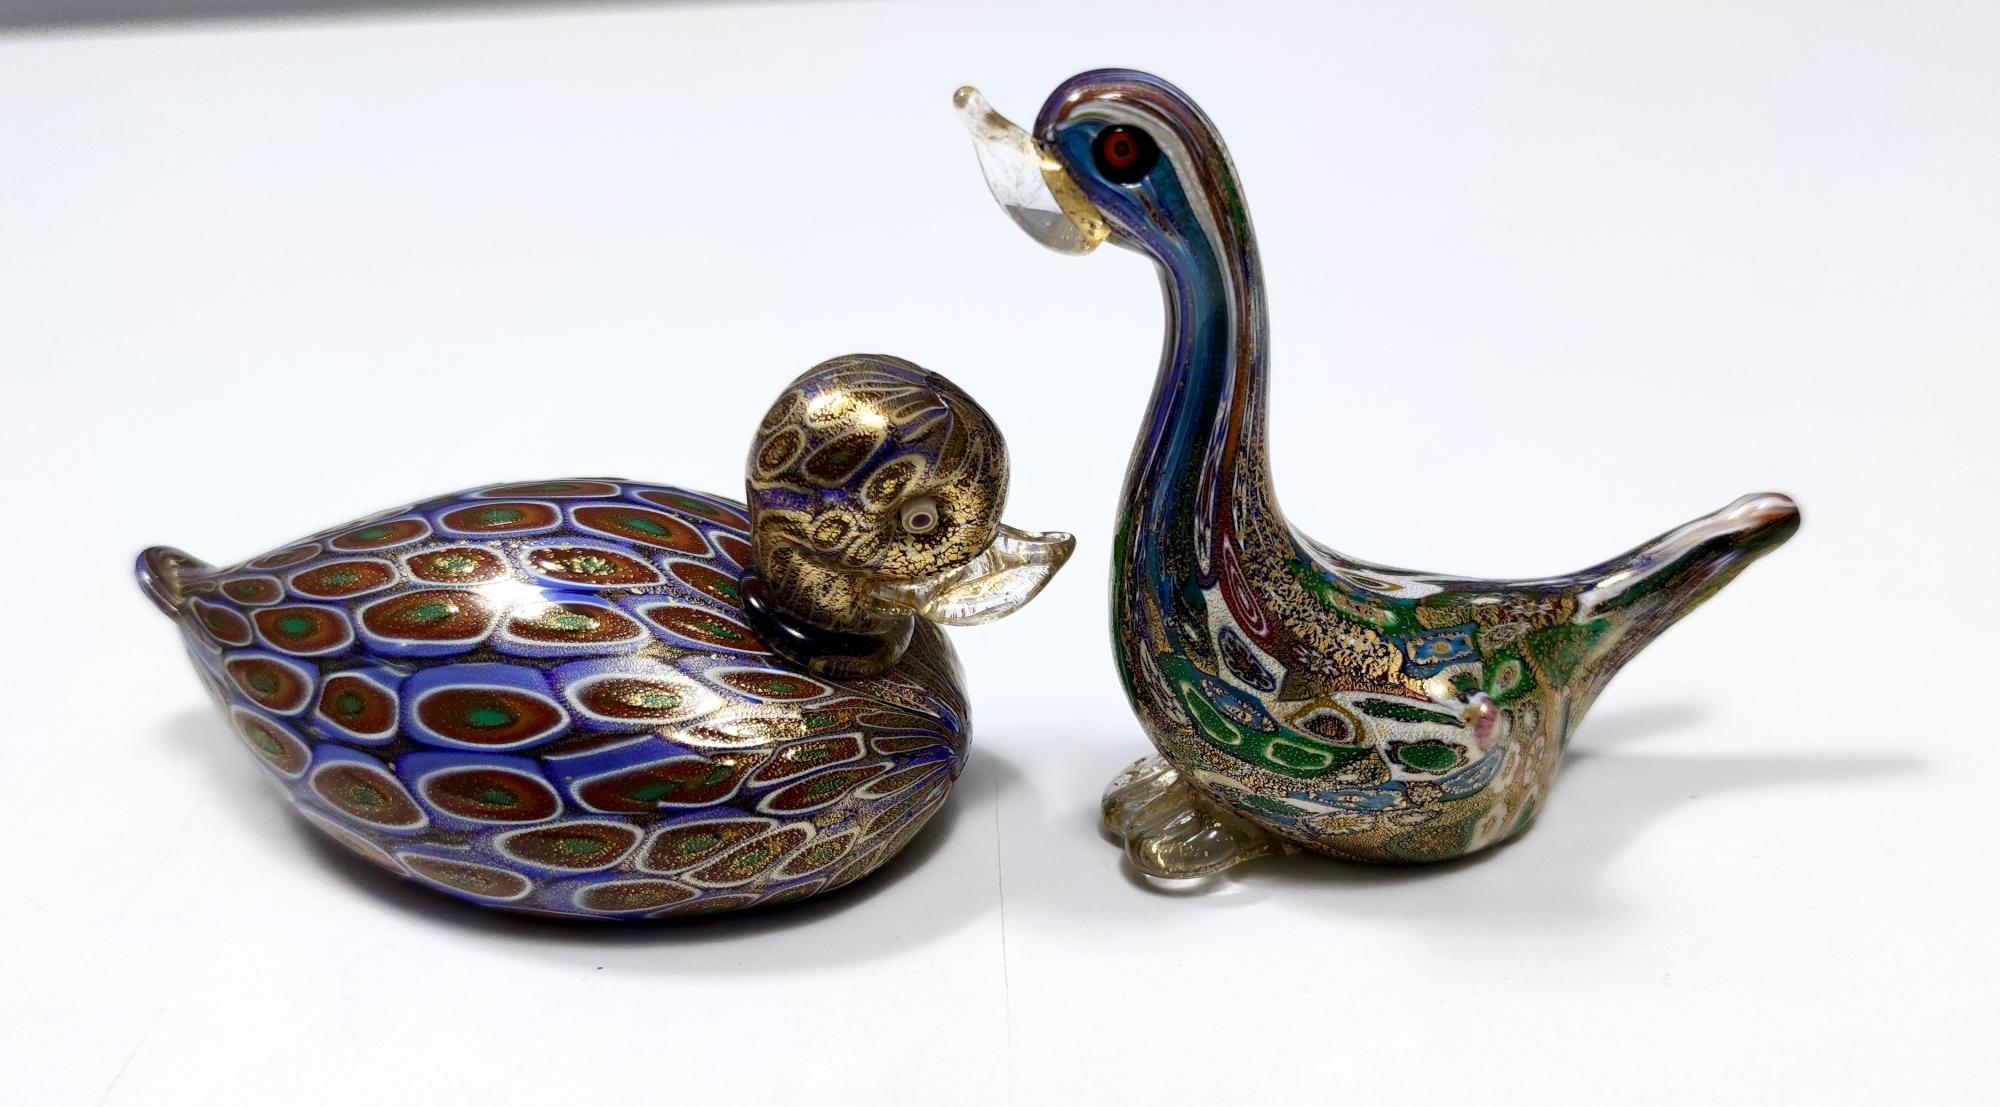 Made in Italy, 1990s.
This duck is made in Murano glass with gold leaf and murrines.
It has its original signature and it is in excellent original condition.

Measures: Width 13 cm
Depth 7 cm
Height 5.5 cm.

Order it now!
We sell the best quality